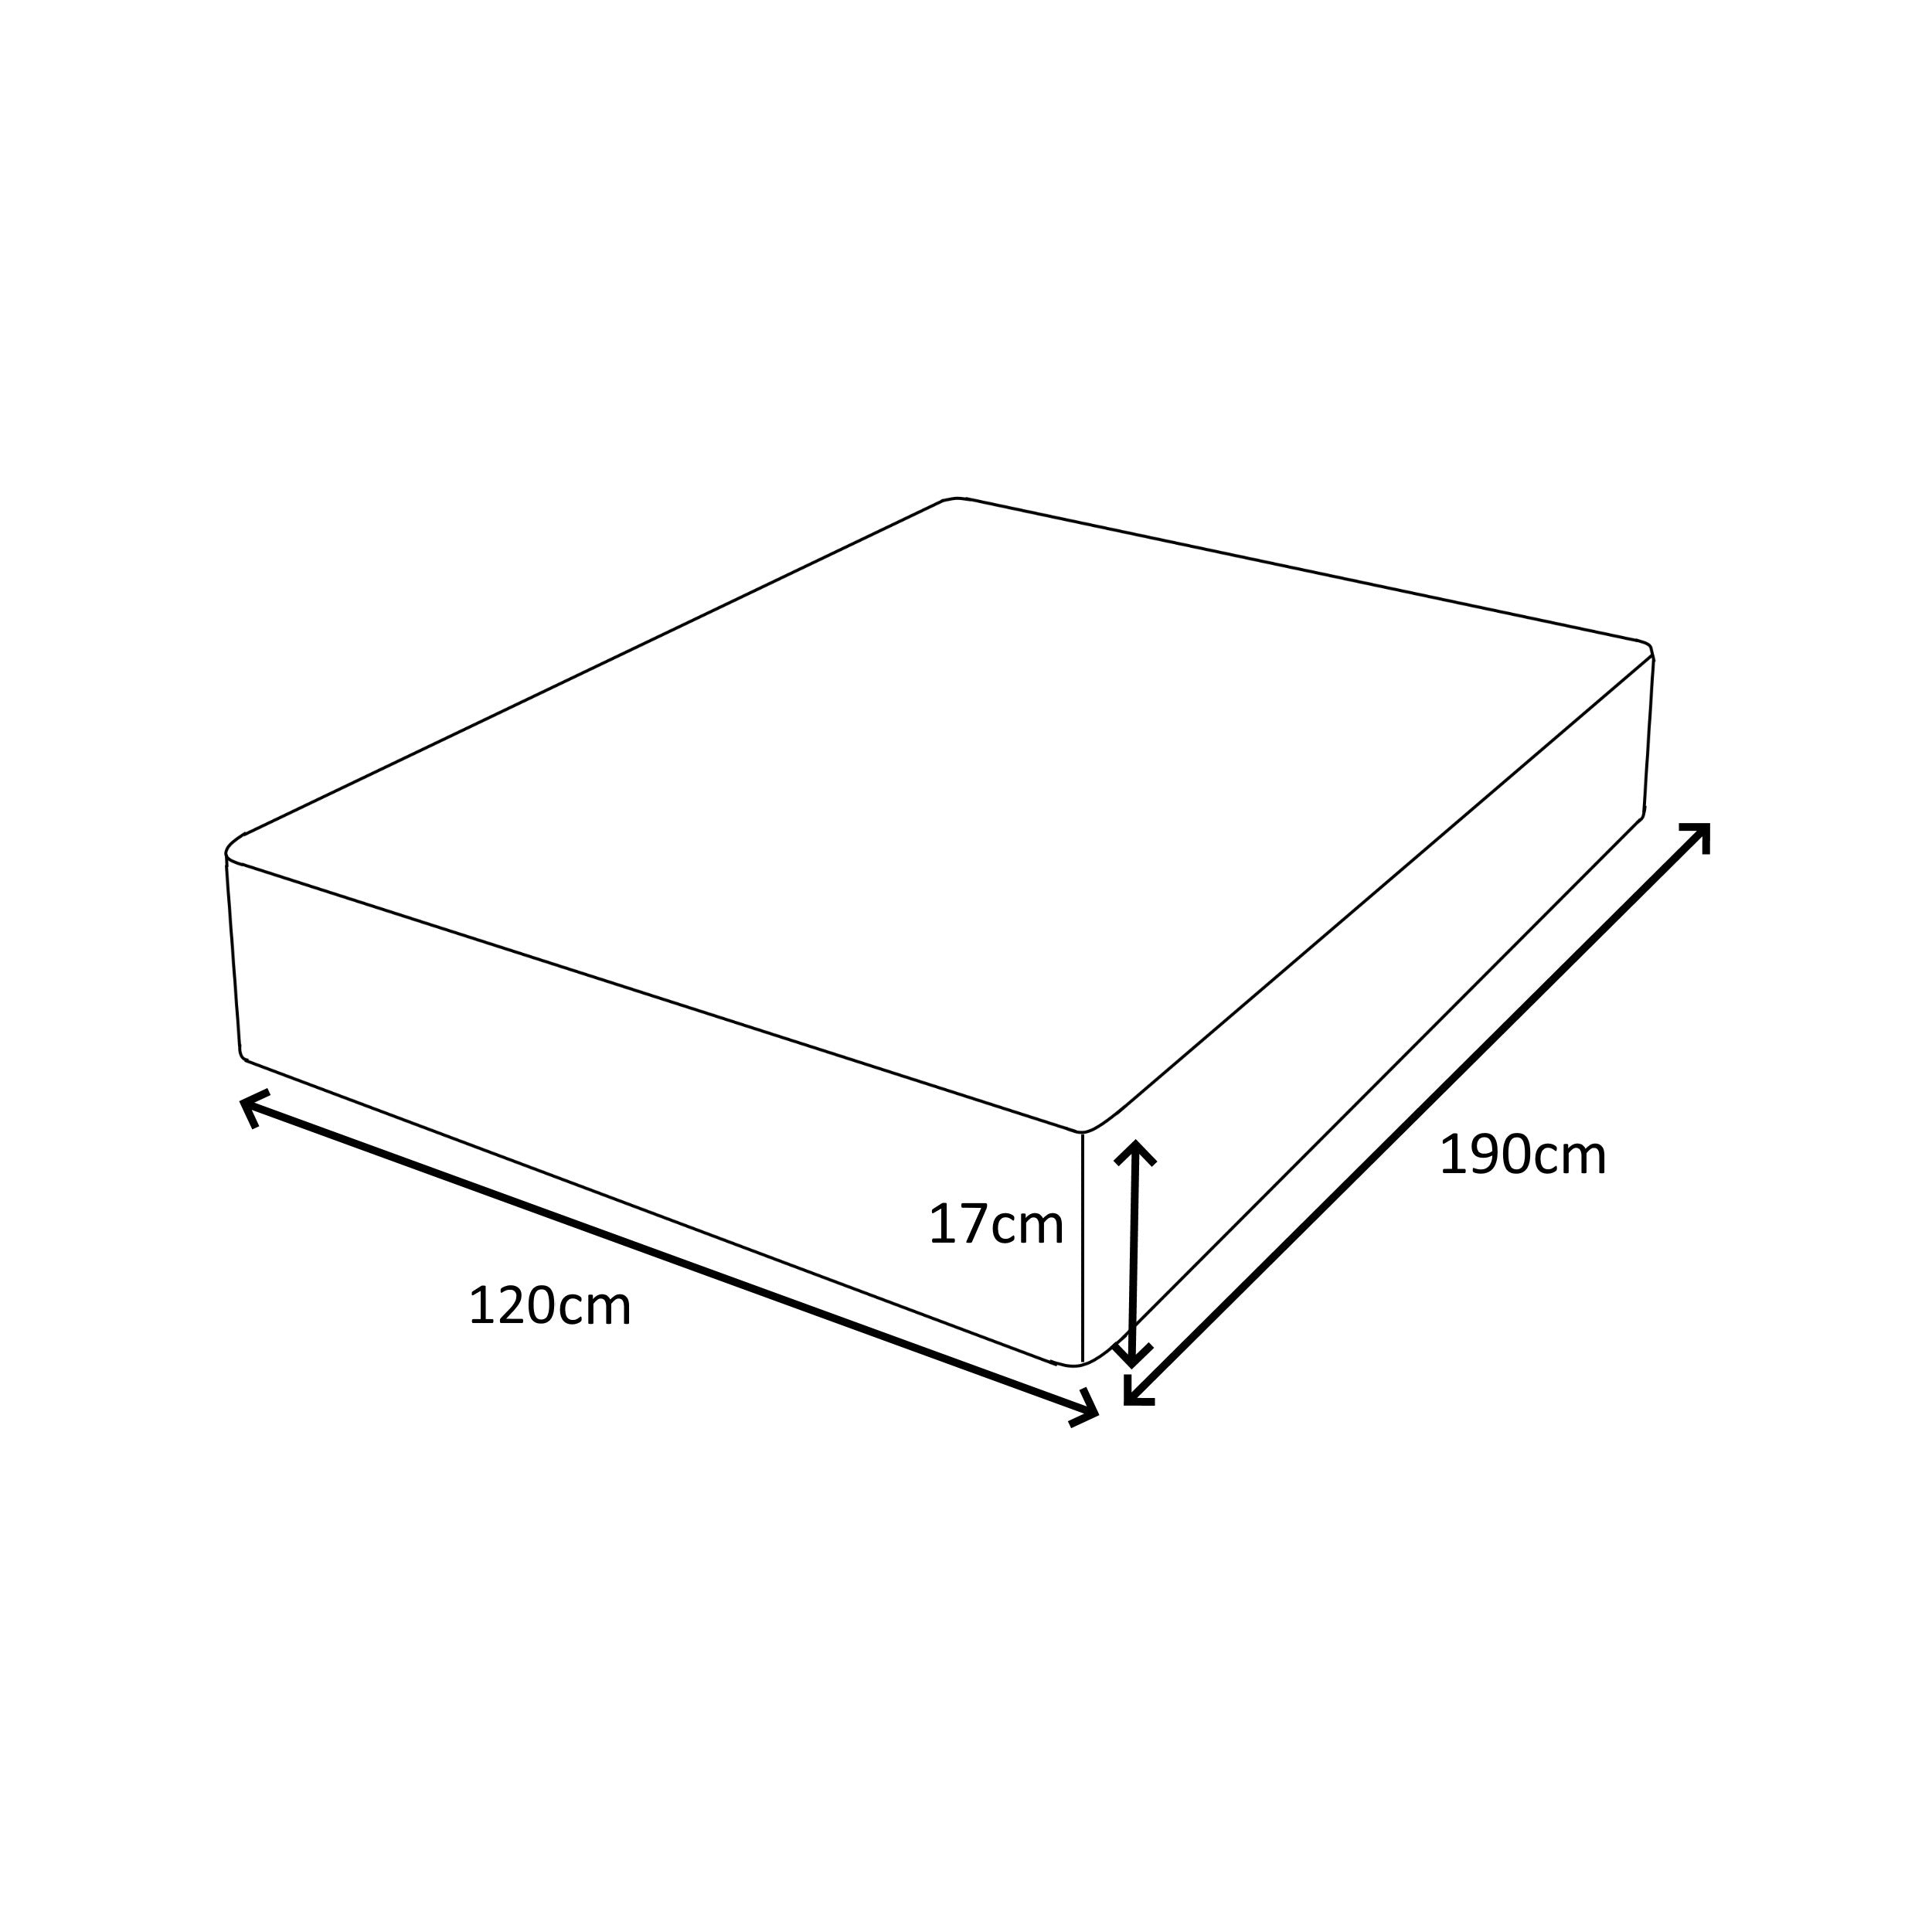 4FT Small Double Mattresses